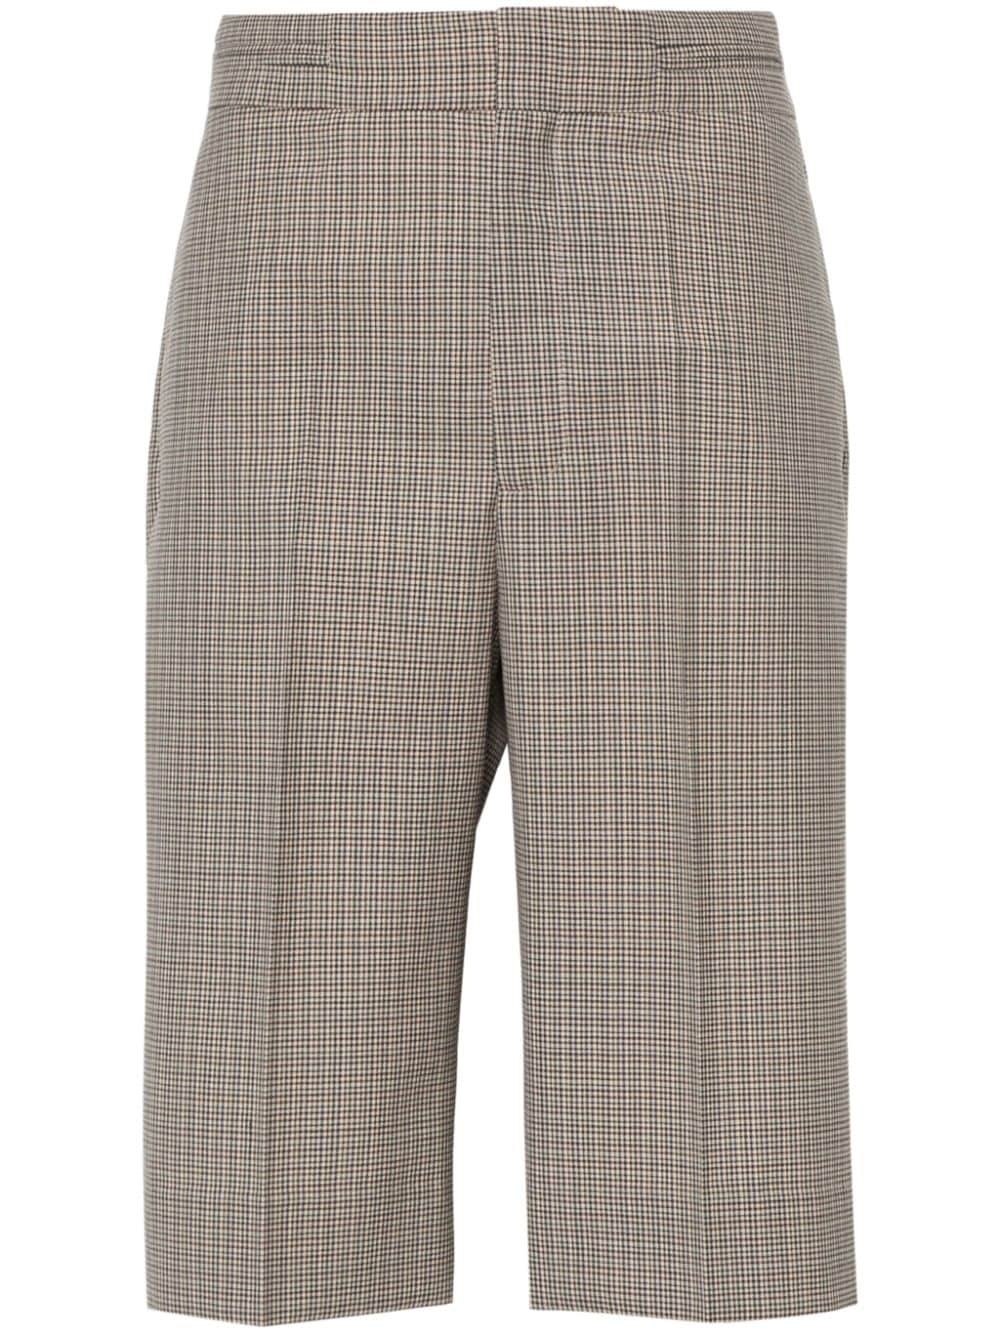 houndstooth-pattern tailored shorts - 1